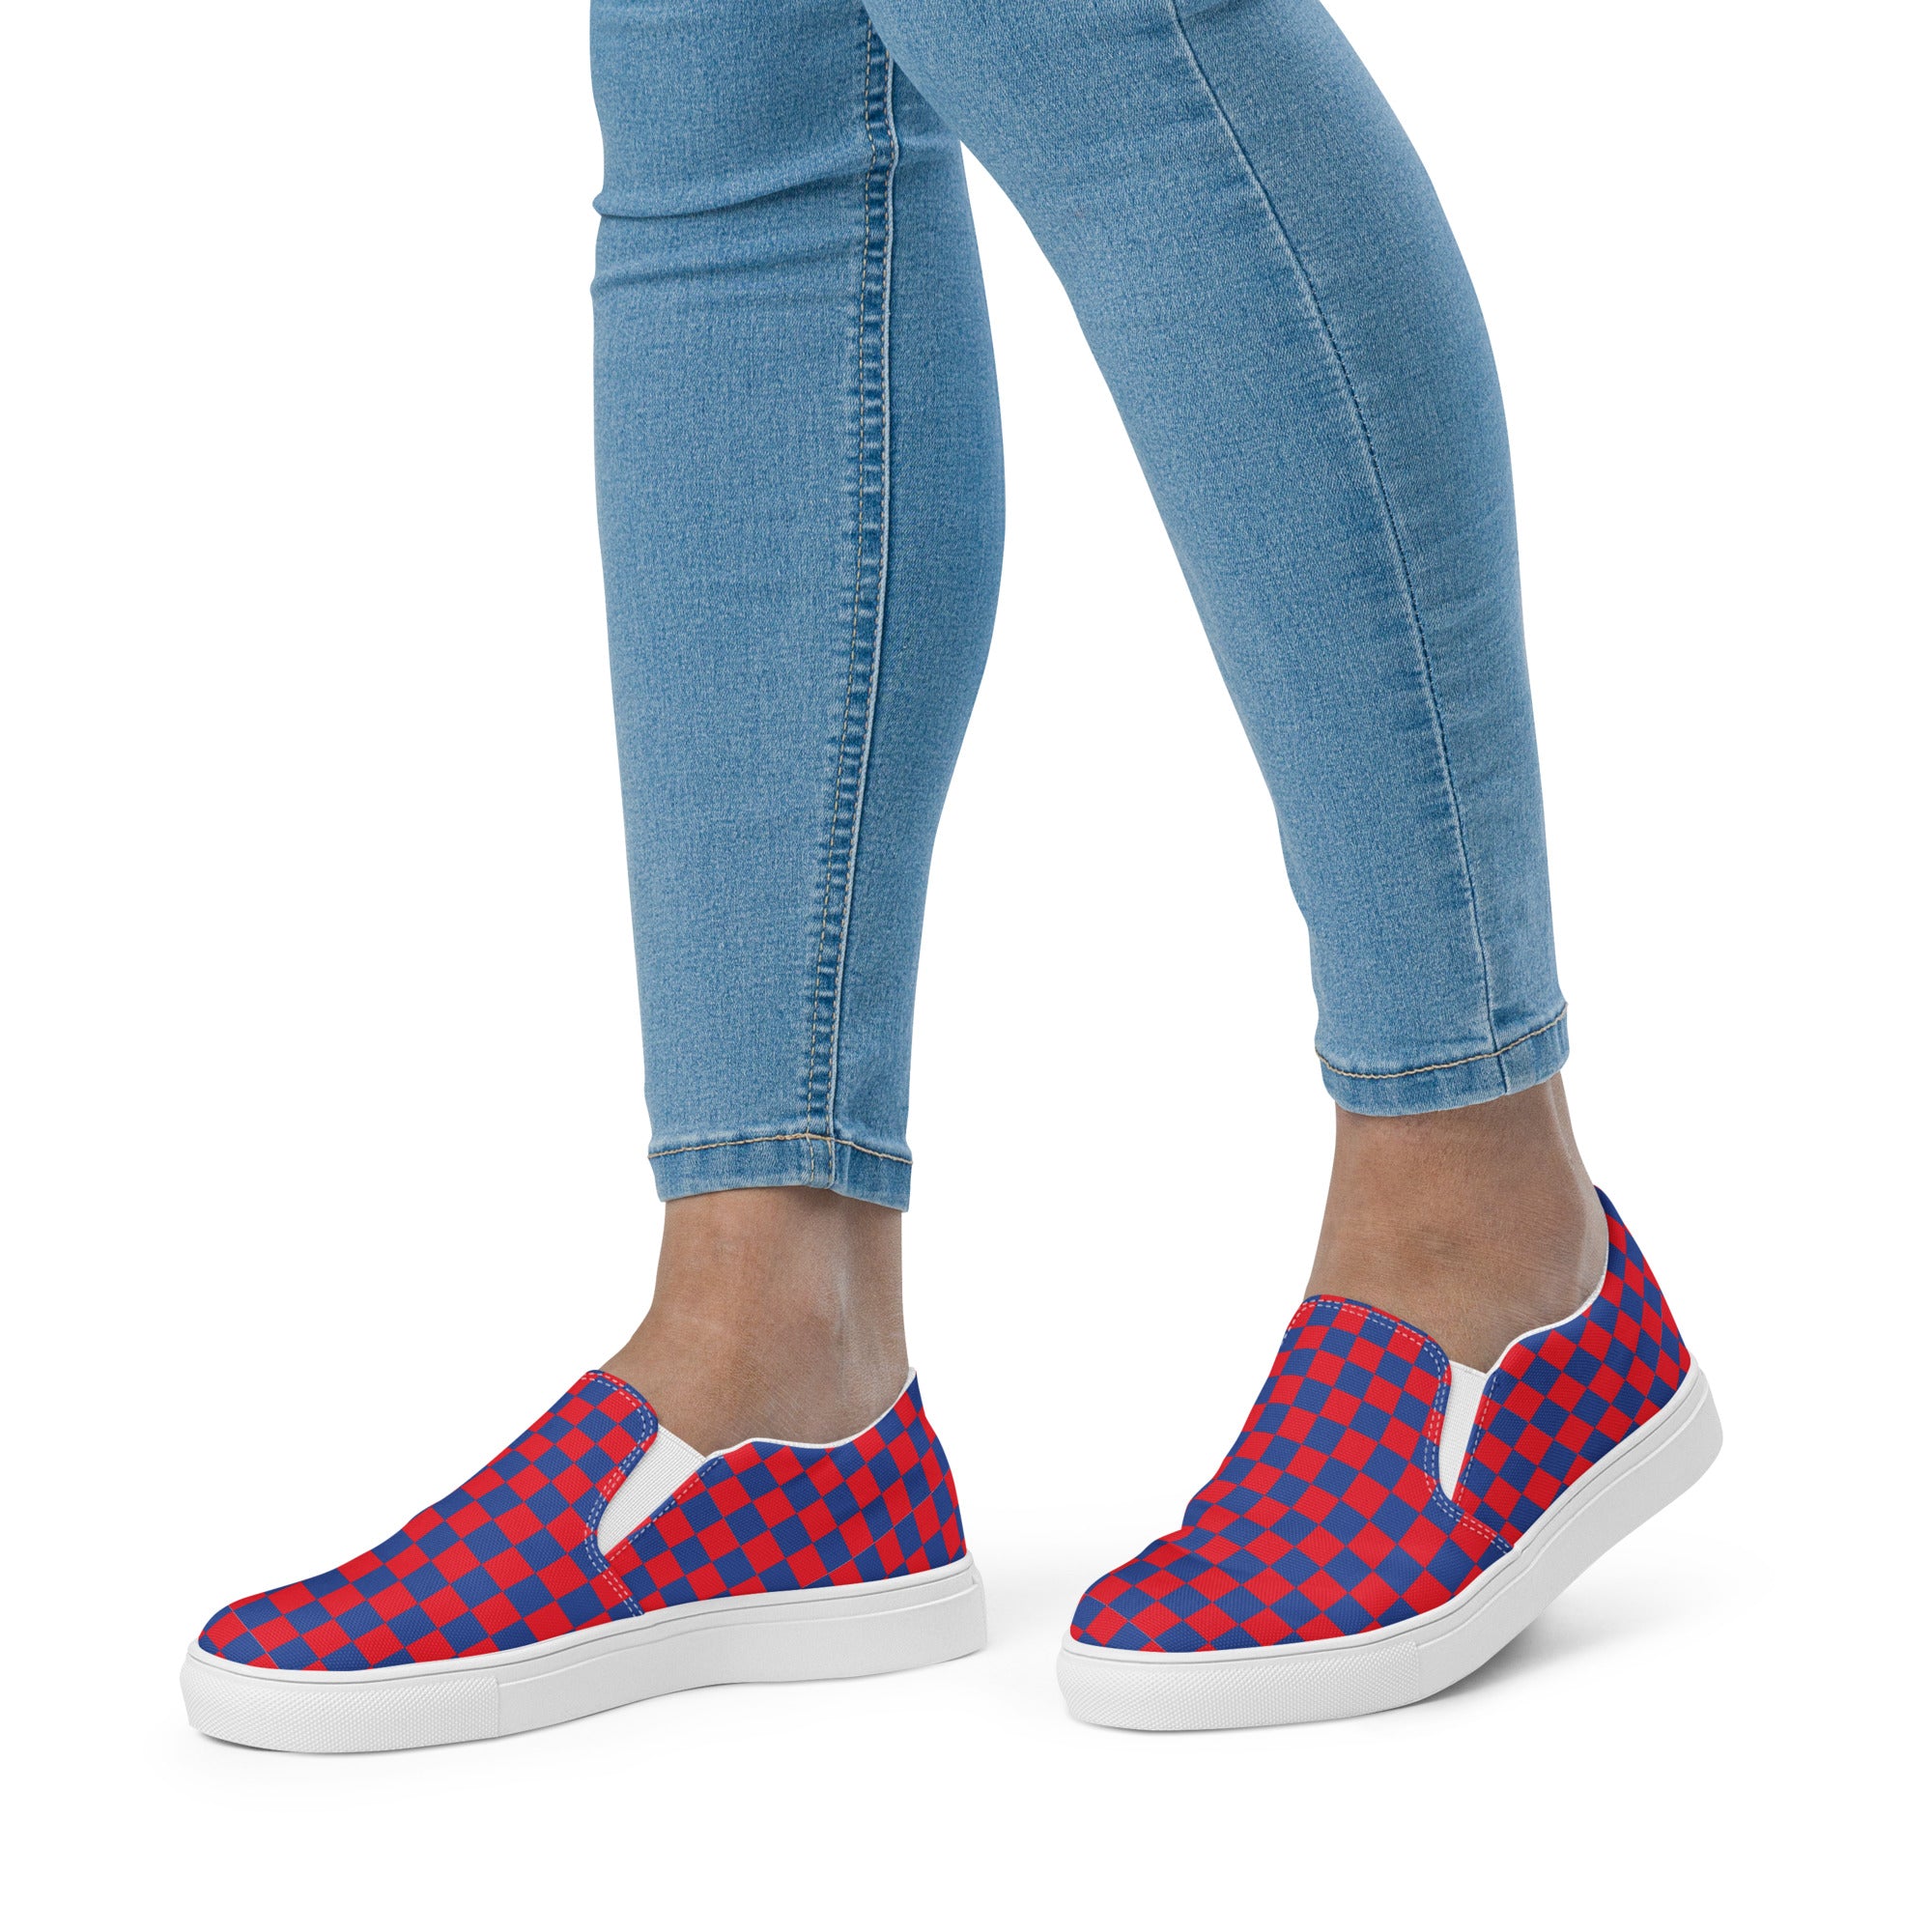 "The Bell Ringers" Women’s Slip-on Canvas Shoes